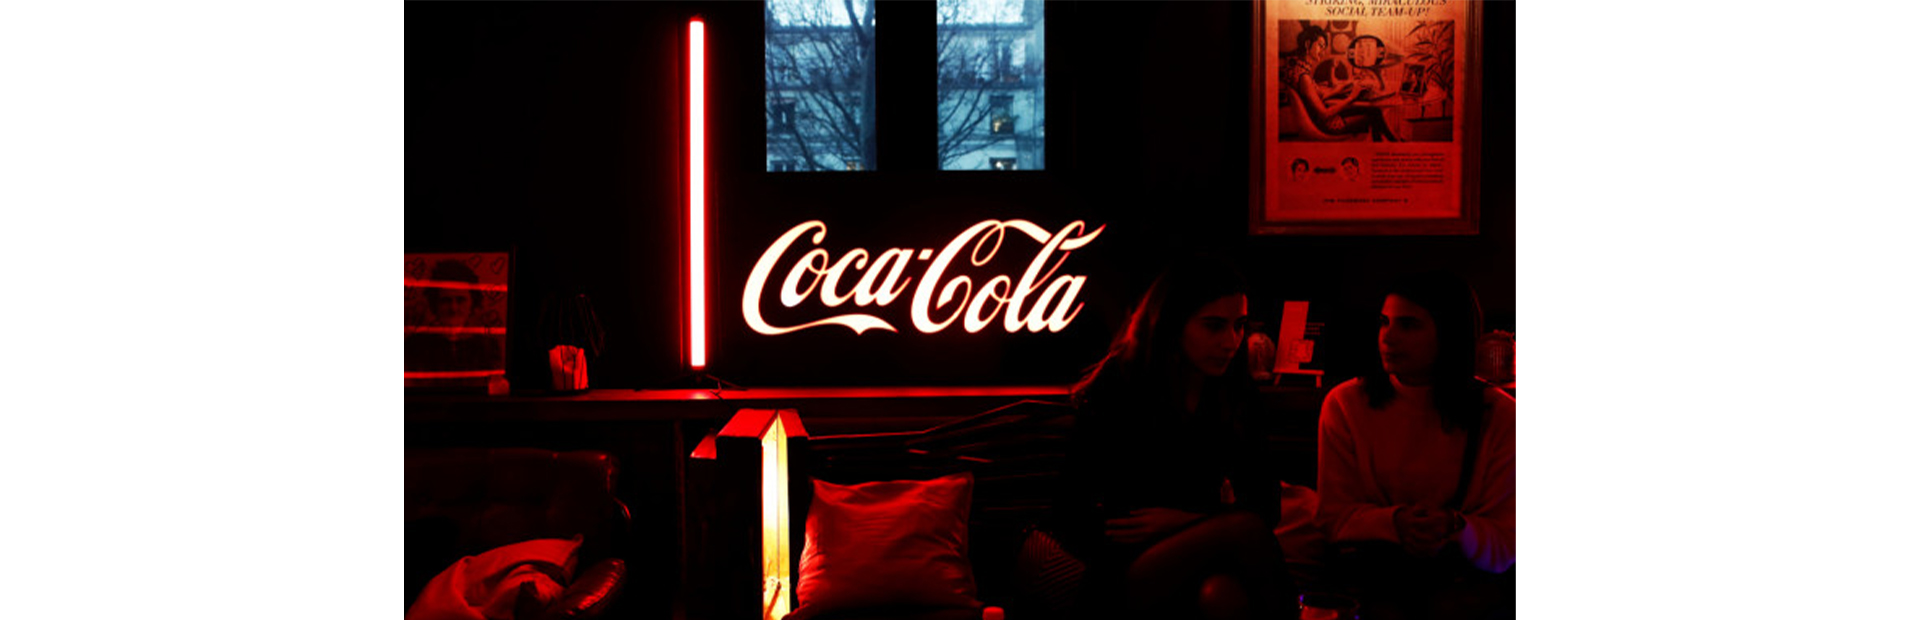 A Coca-Cola logo is pictured during an event in Paris, France, March 21, 2019/ Reuters